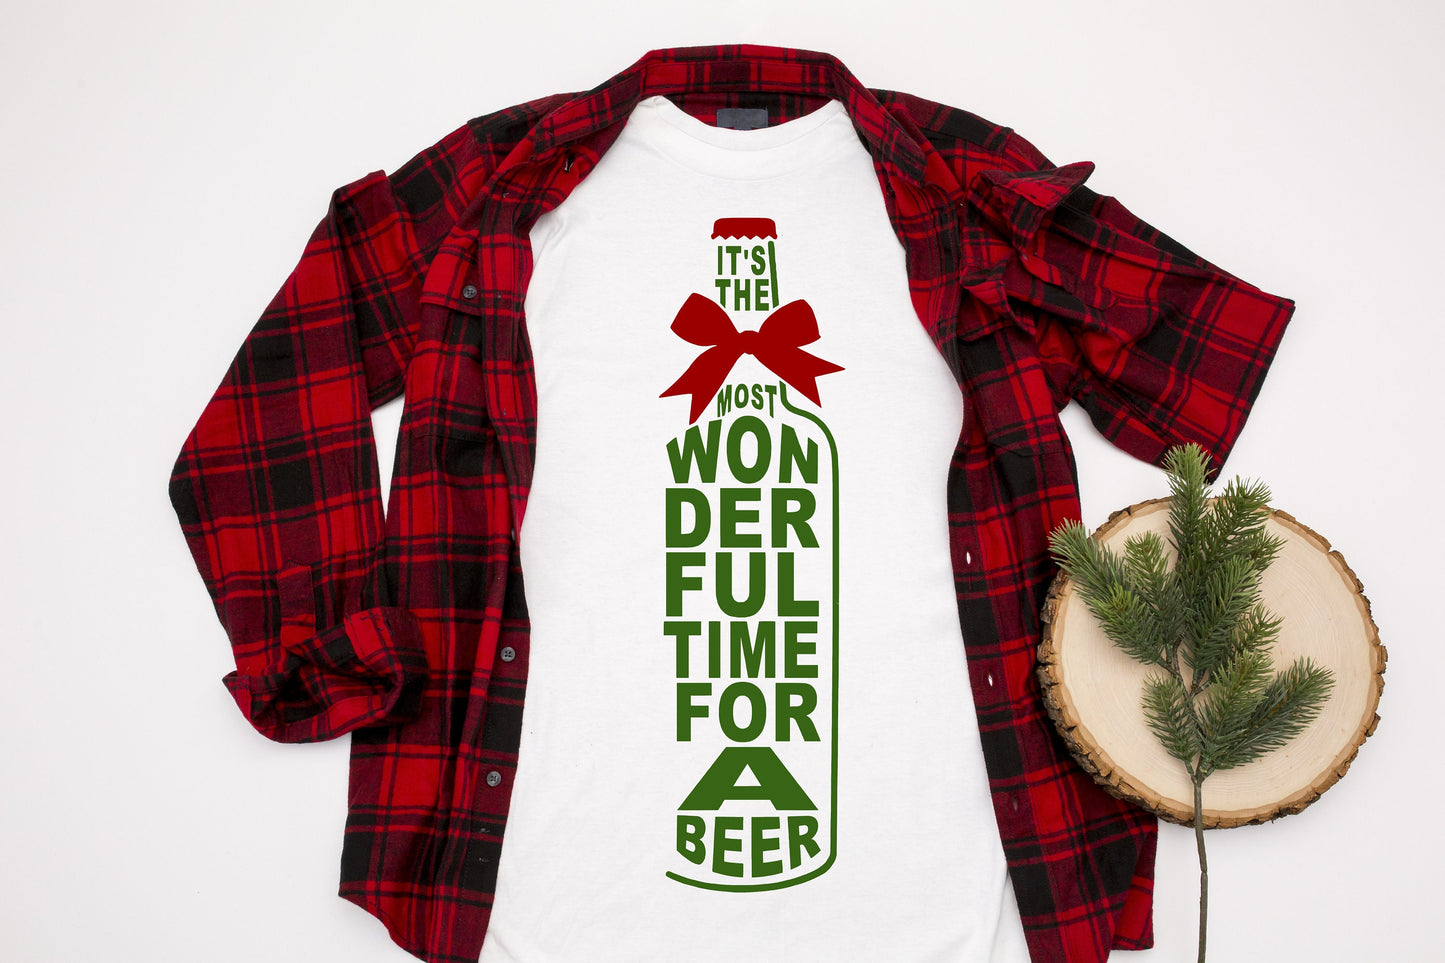 It's the Most Wonderful Time for a Beer Men's t-shirt - christmas shirt - christmas party t-shirt - funny drinking shirt - christmas spirits